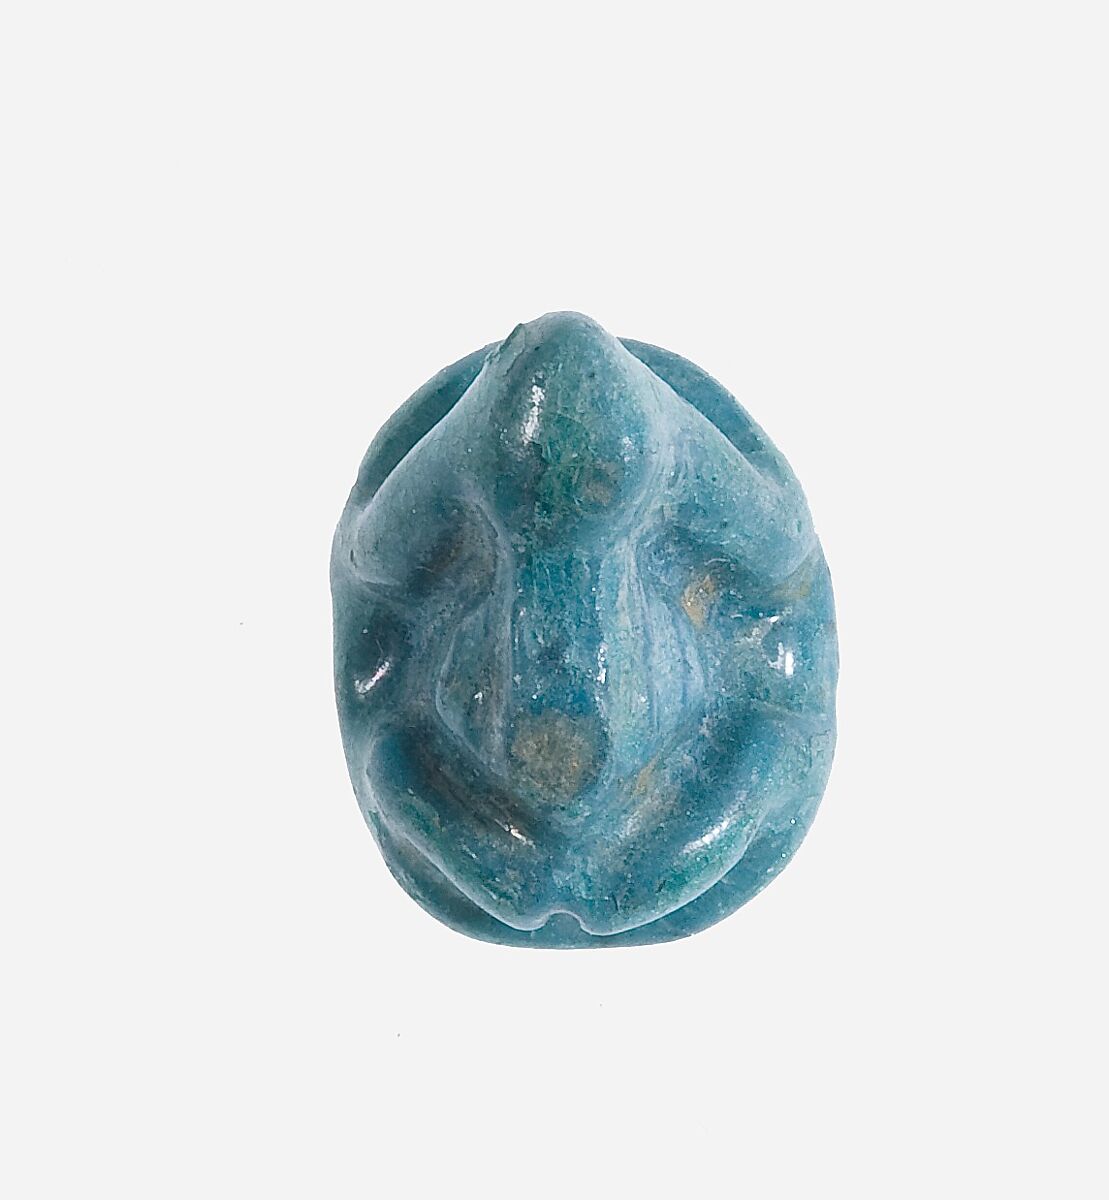 Frog Seal Amulet with an Ankh Hieroglyph on the Base, Faience 